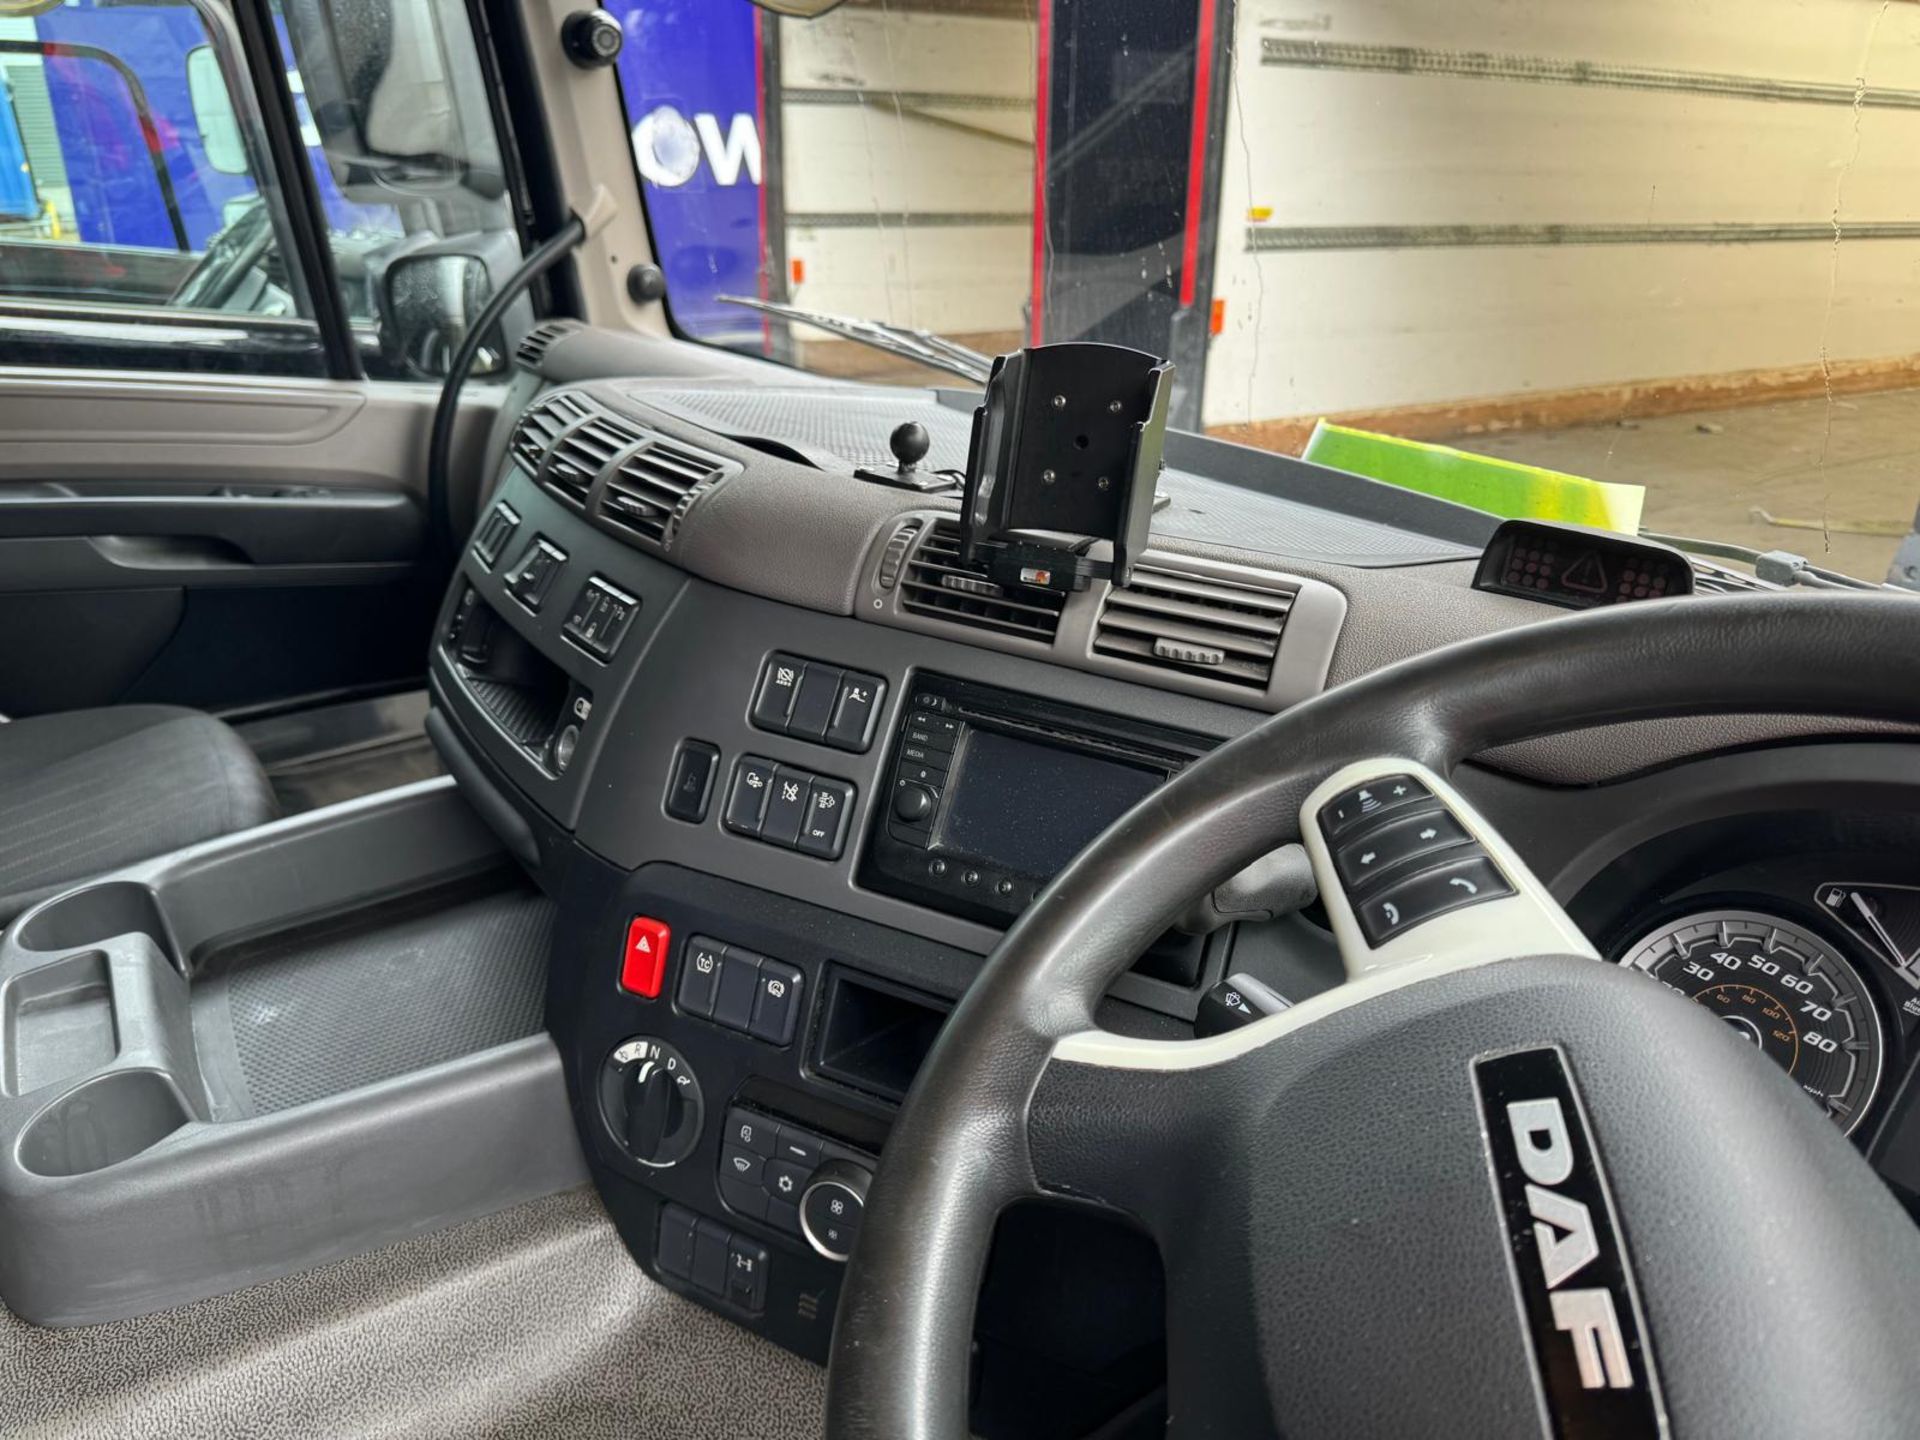 2019, DAF CF 260 FA (Ex-Fleet Owned & Maintained) - FN69 AXD (18 Ton Rigid Truck with Tail Lift) - Image 10 of 20